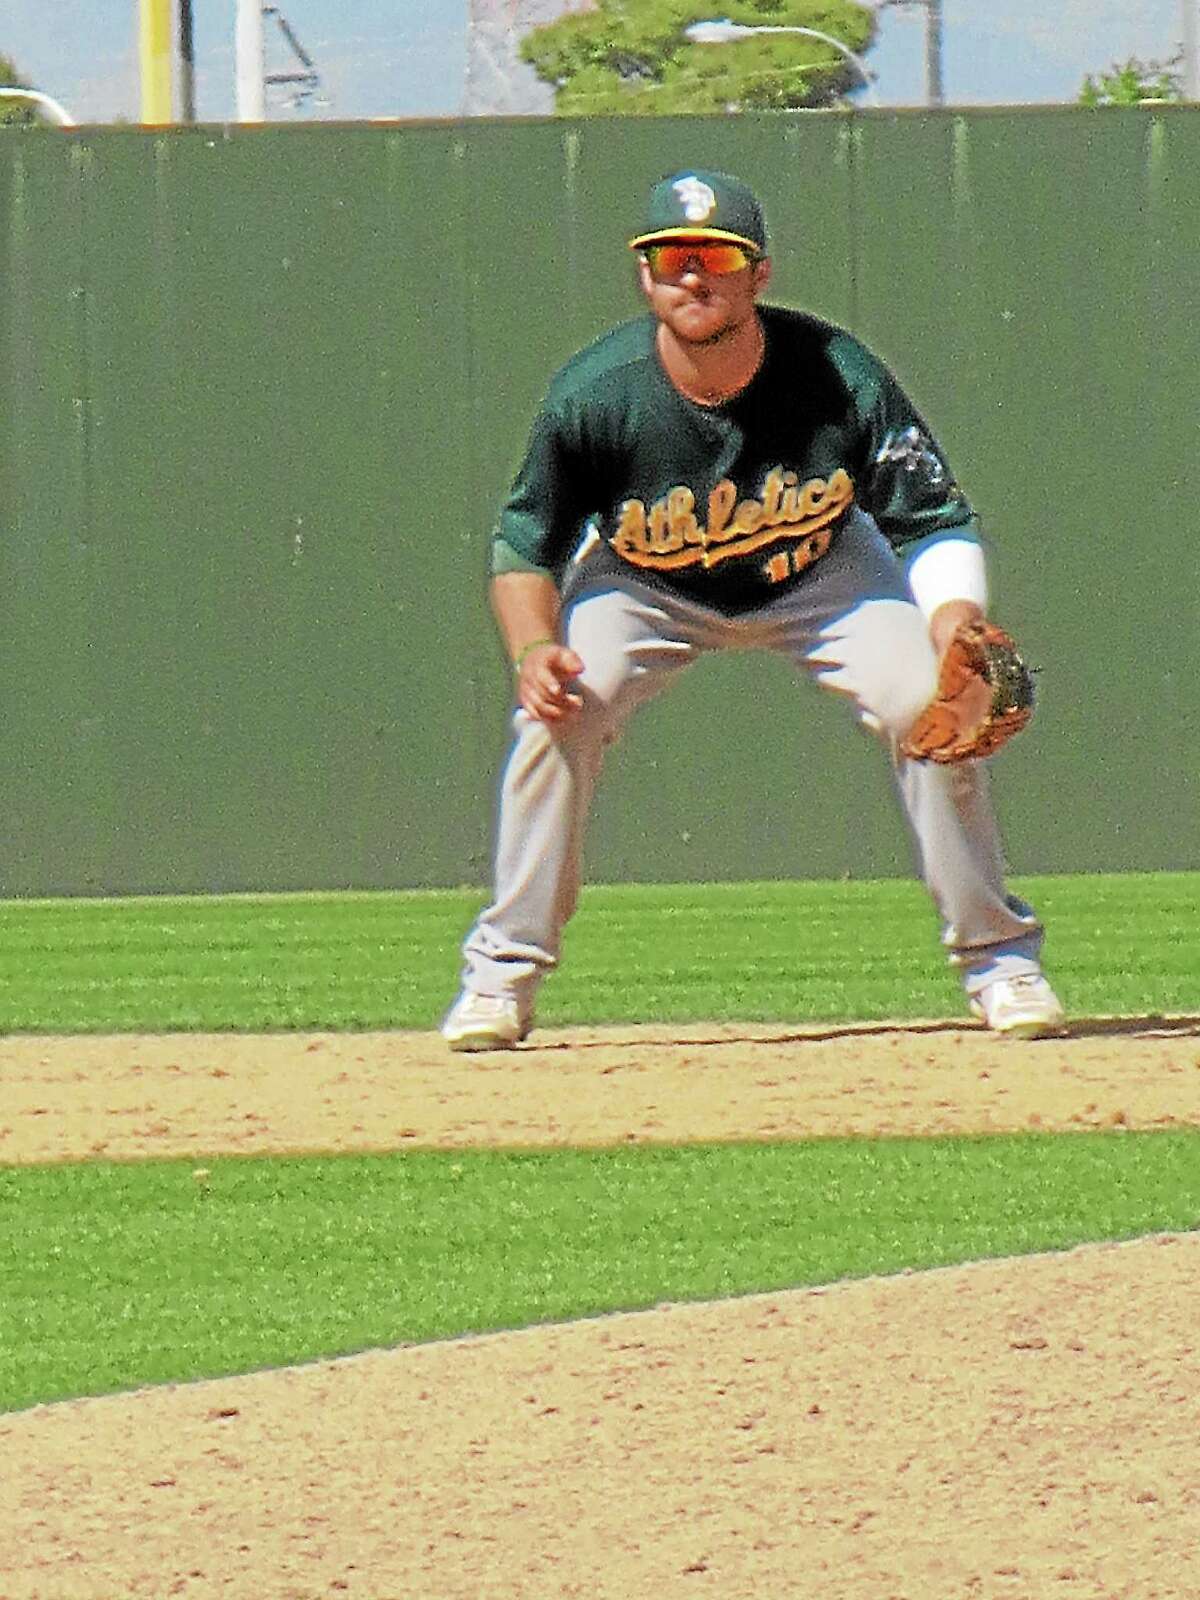 Mike Fabiaschi finished his professional baseball career with a .232 batting average, three home runs and 39 RBI in parts of four seasons in the Oakland Athletics organization.